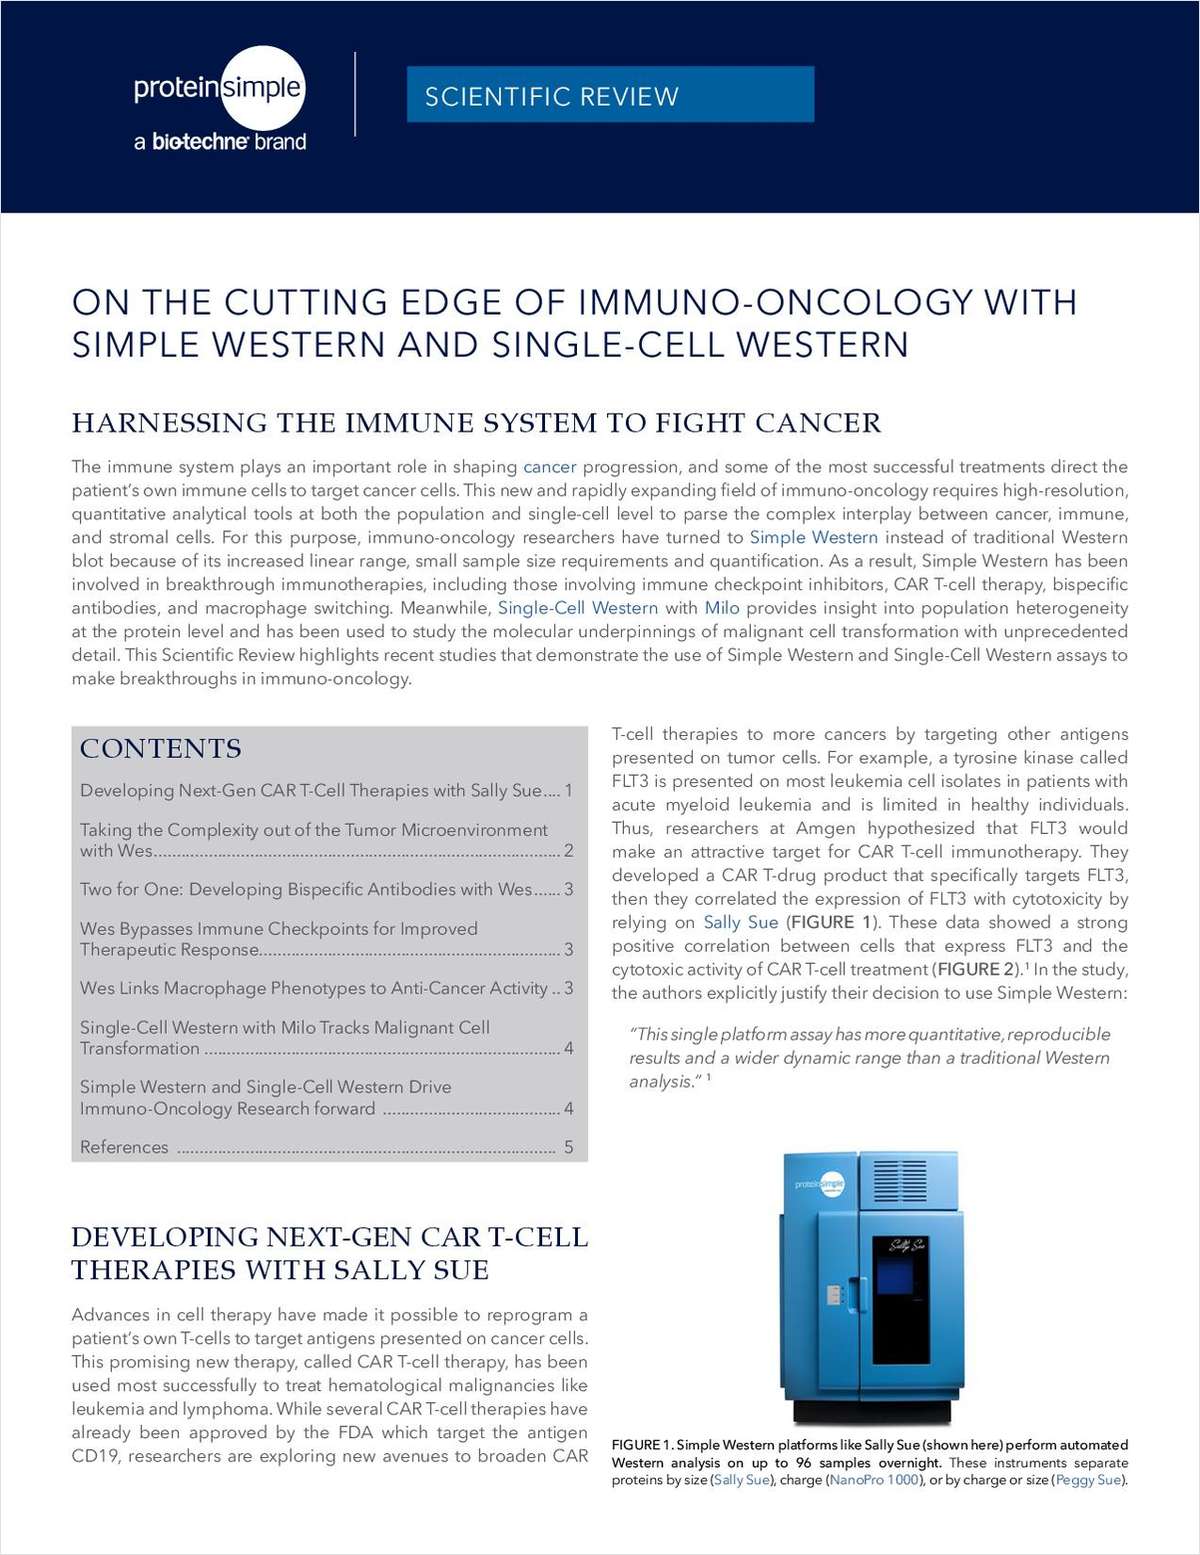 On the Cutting Edge of Immuno-Oncology with Simple Western and Single-Cell Western